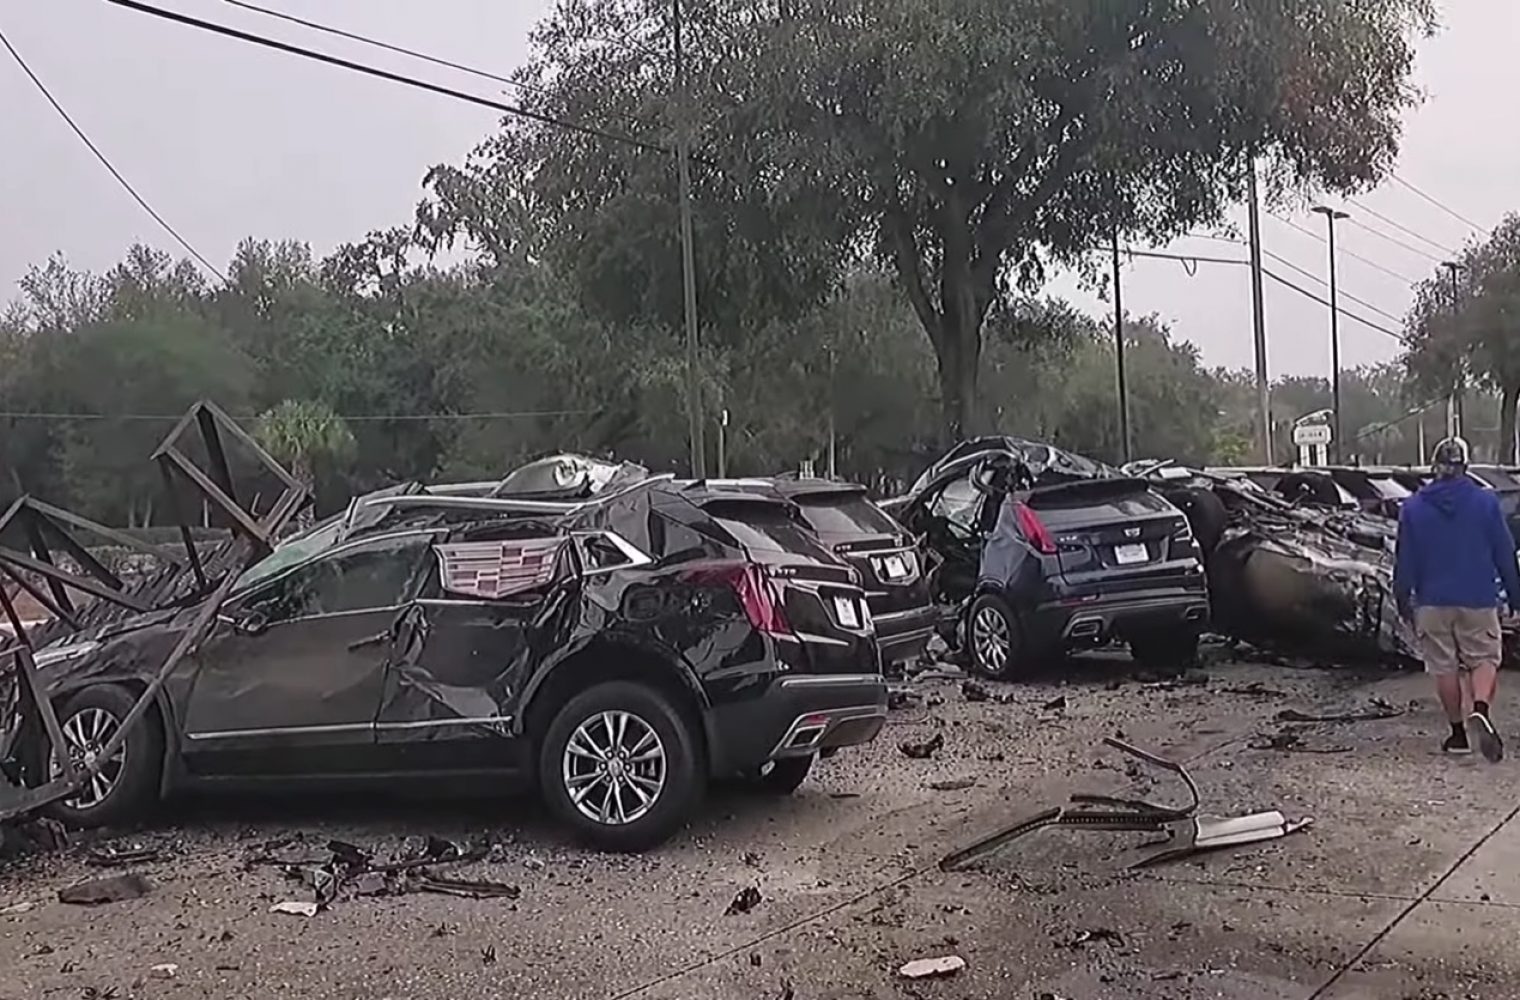 Row of Cadillac XT4s and XT5s got destroyed by rogue street racer